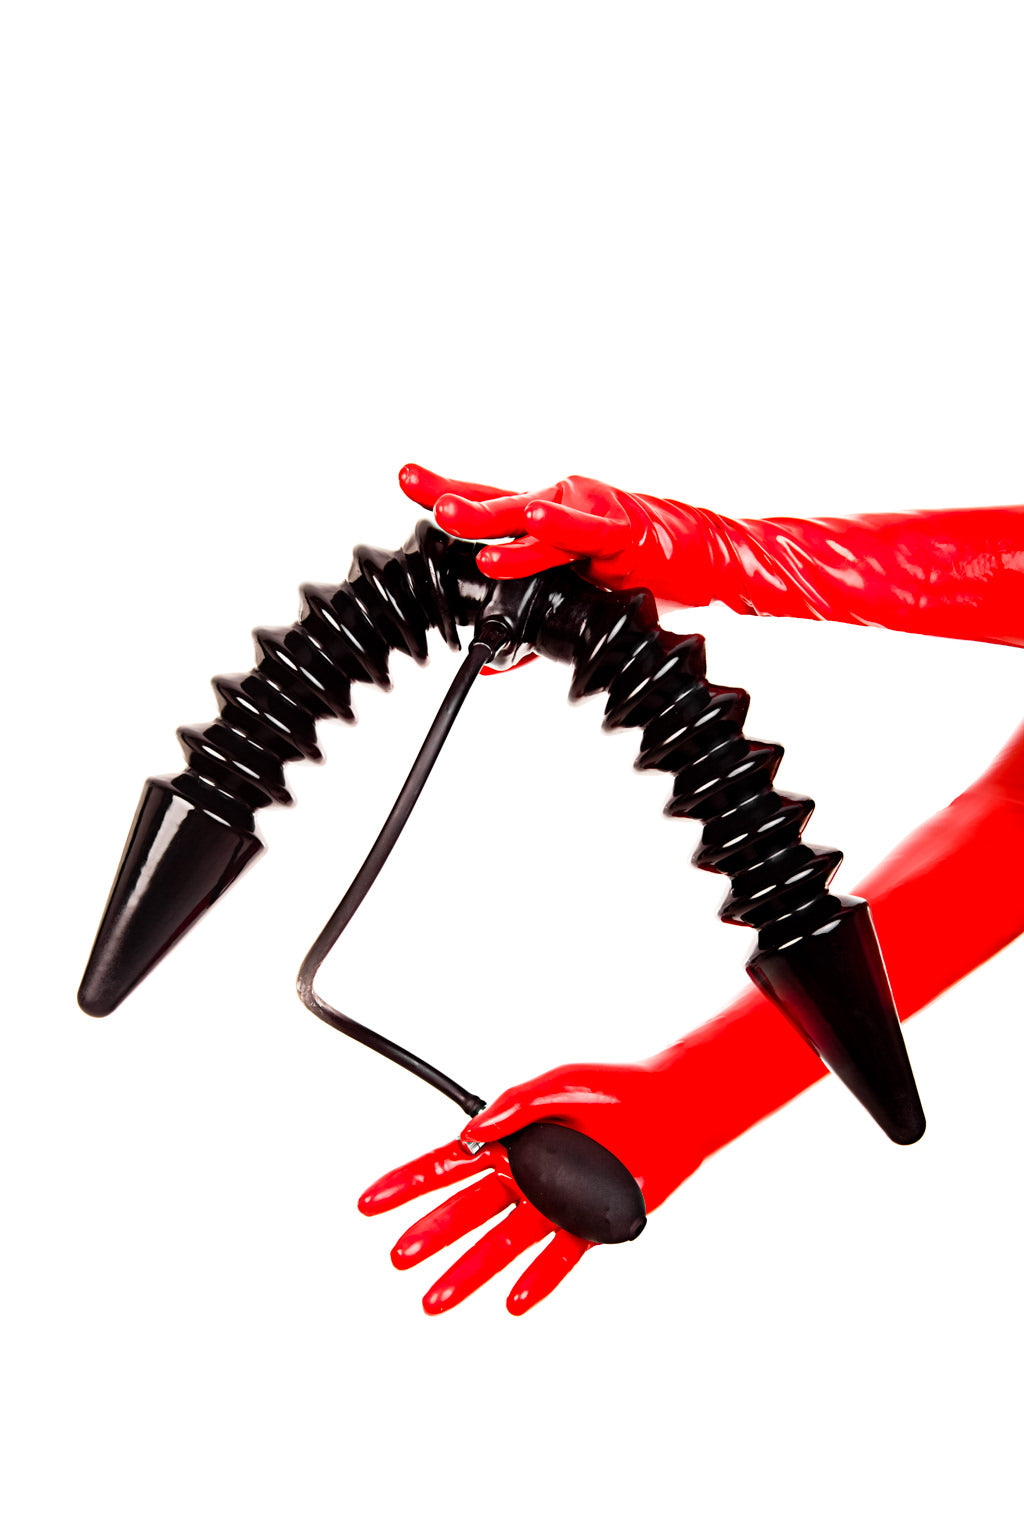 Red latex gloves holding a dual inflatable butt plug with a single pump.